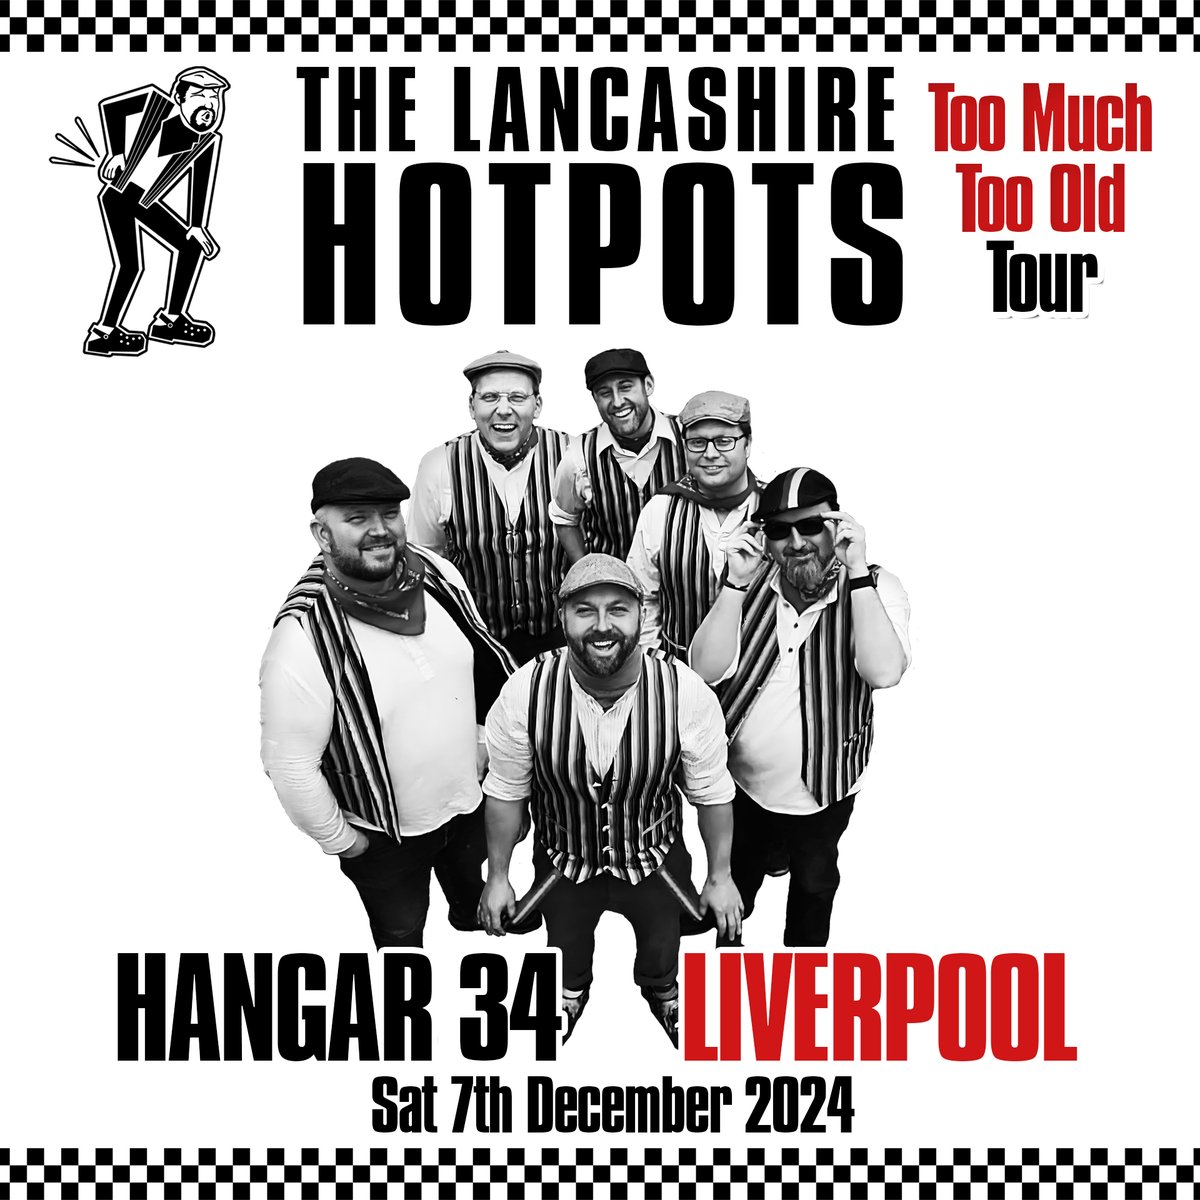 🟣Announcement: The comedy folk band @thehotpots are bringing their Too Much Too Old tour to Liverpool ! Don't miss The Lancashire Hoptpots at Hangar34 Saturday 7th December Tickets on sale NOW:tinyurl.com/362xhjdm